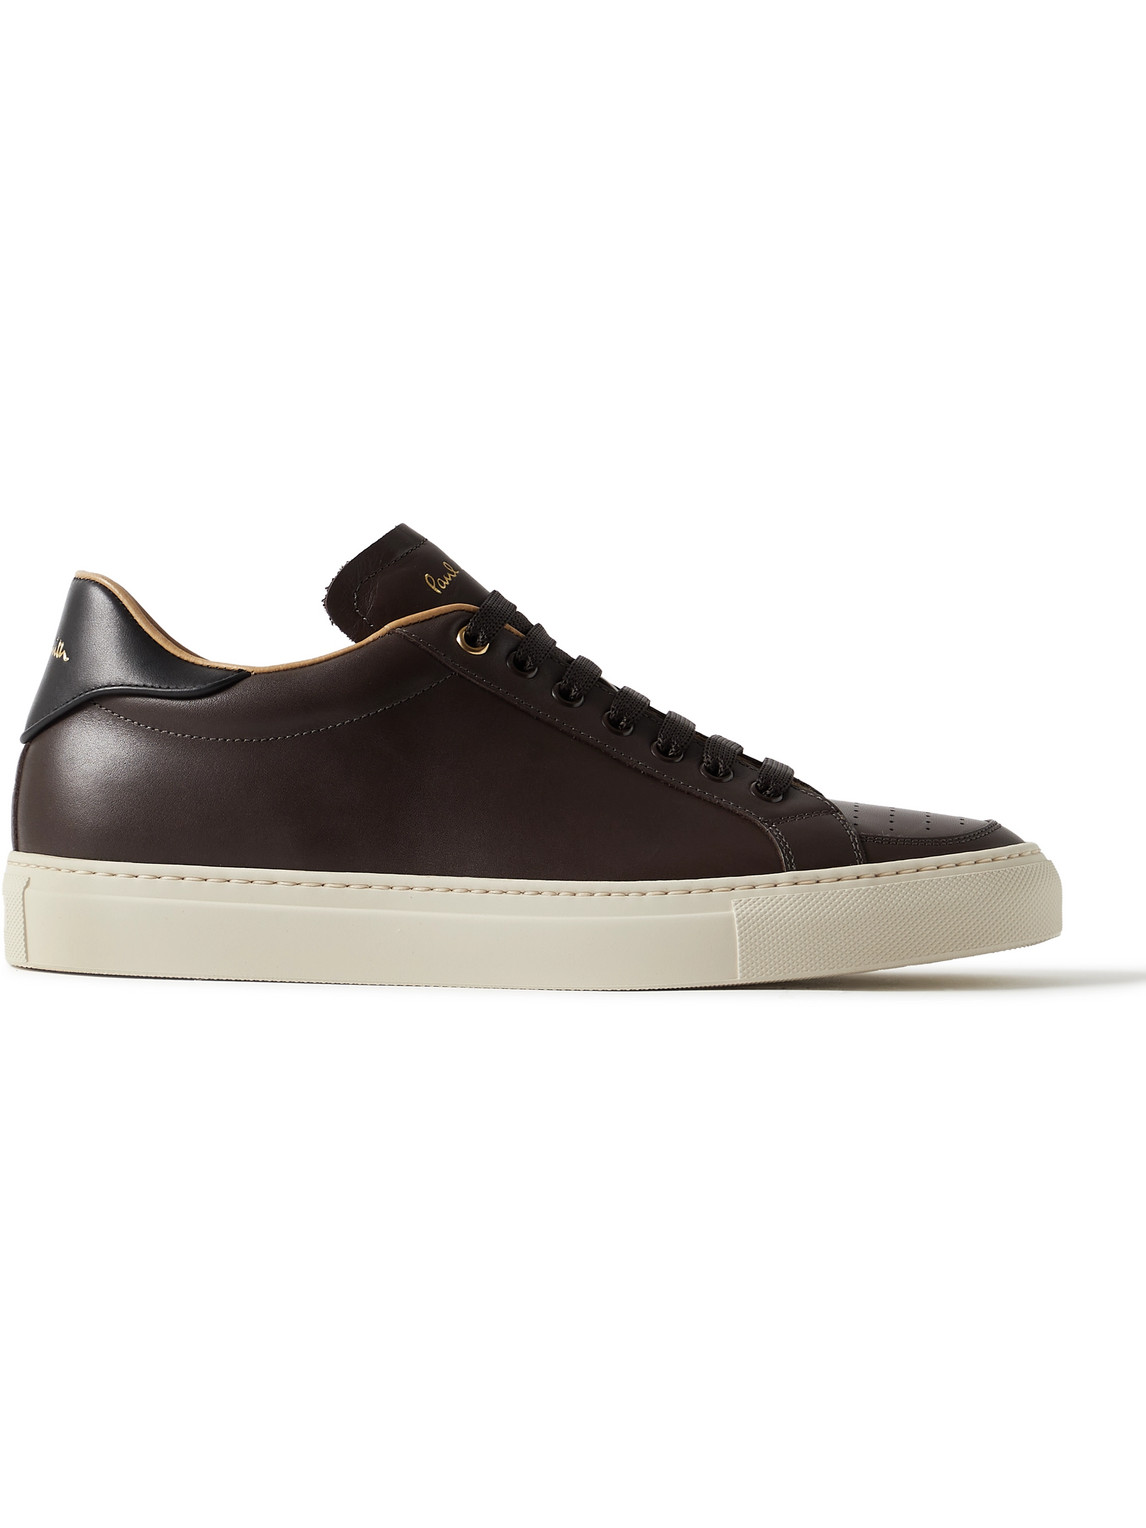 Banff Leather Sneakers